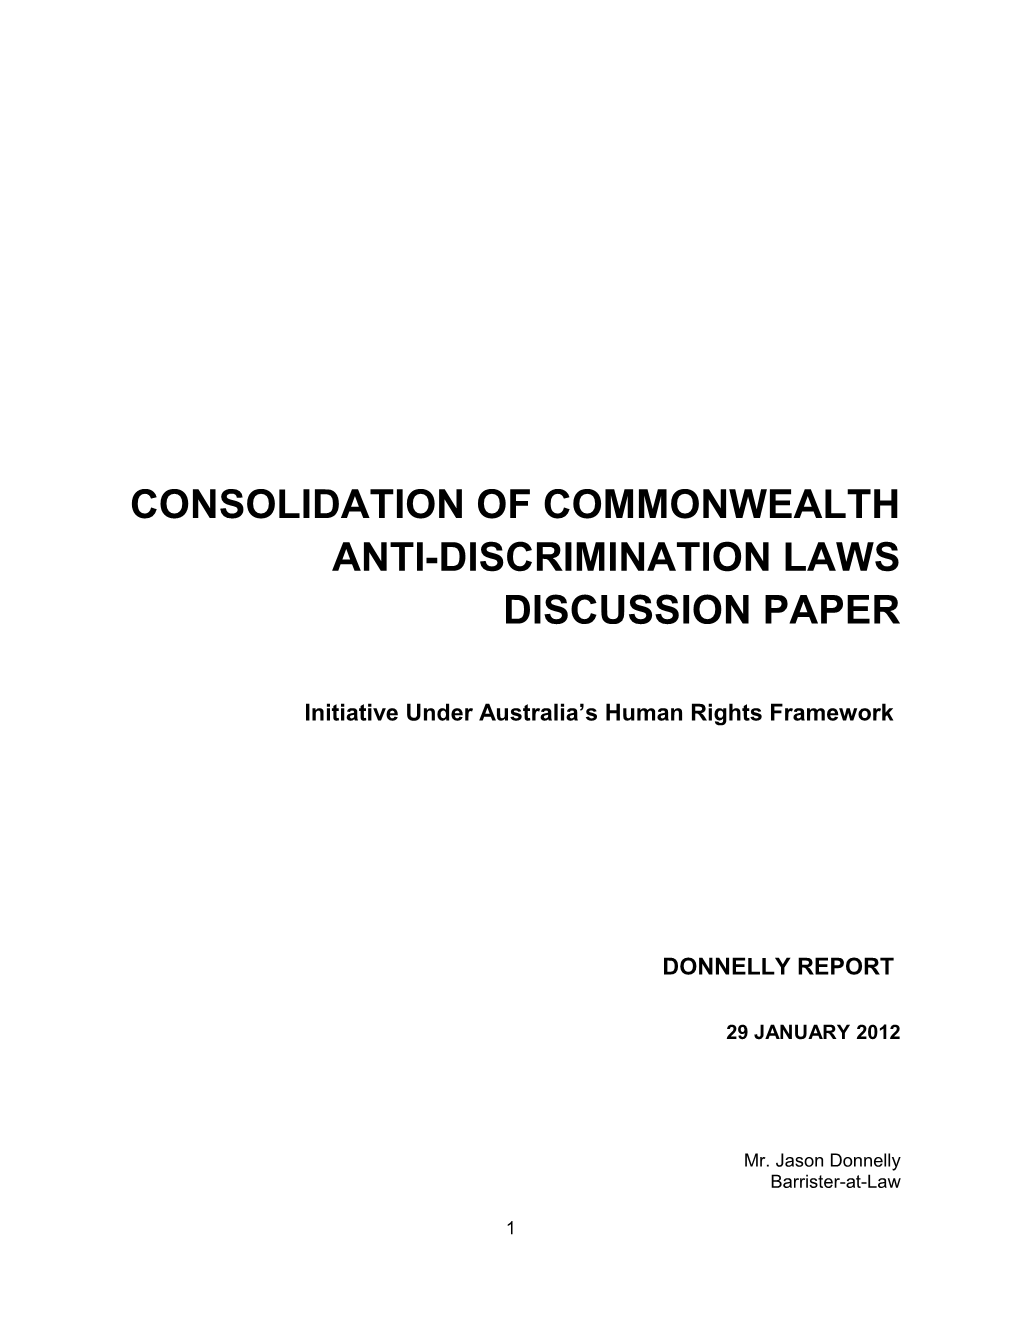 Submission on the Consolidation of Commonwealth Anti-Discrimination Laws - Jason Donnelly